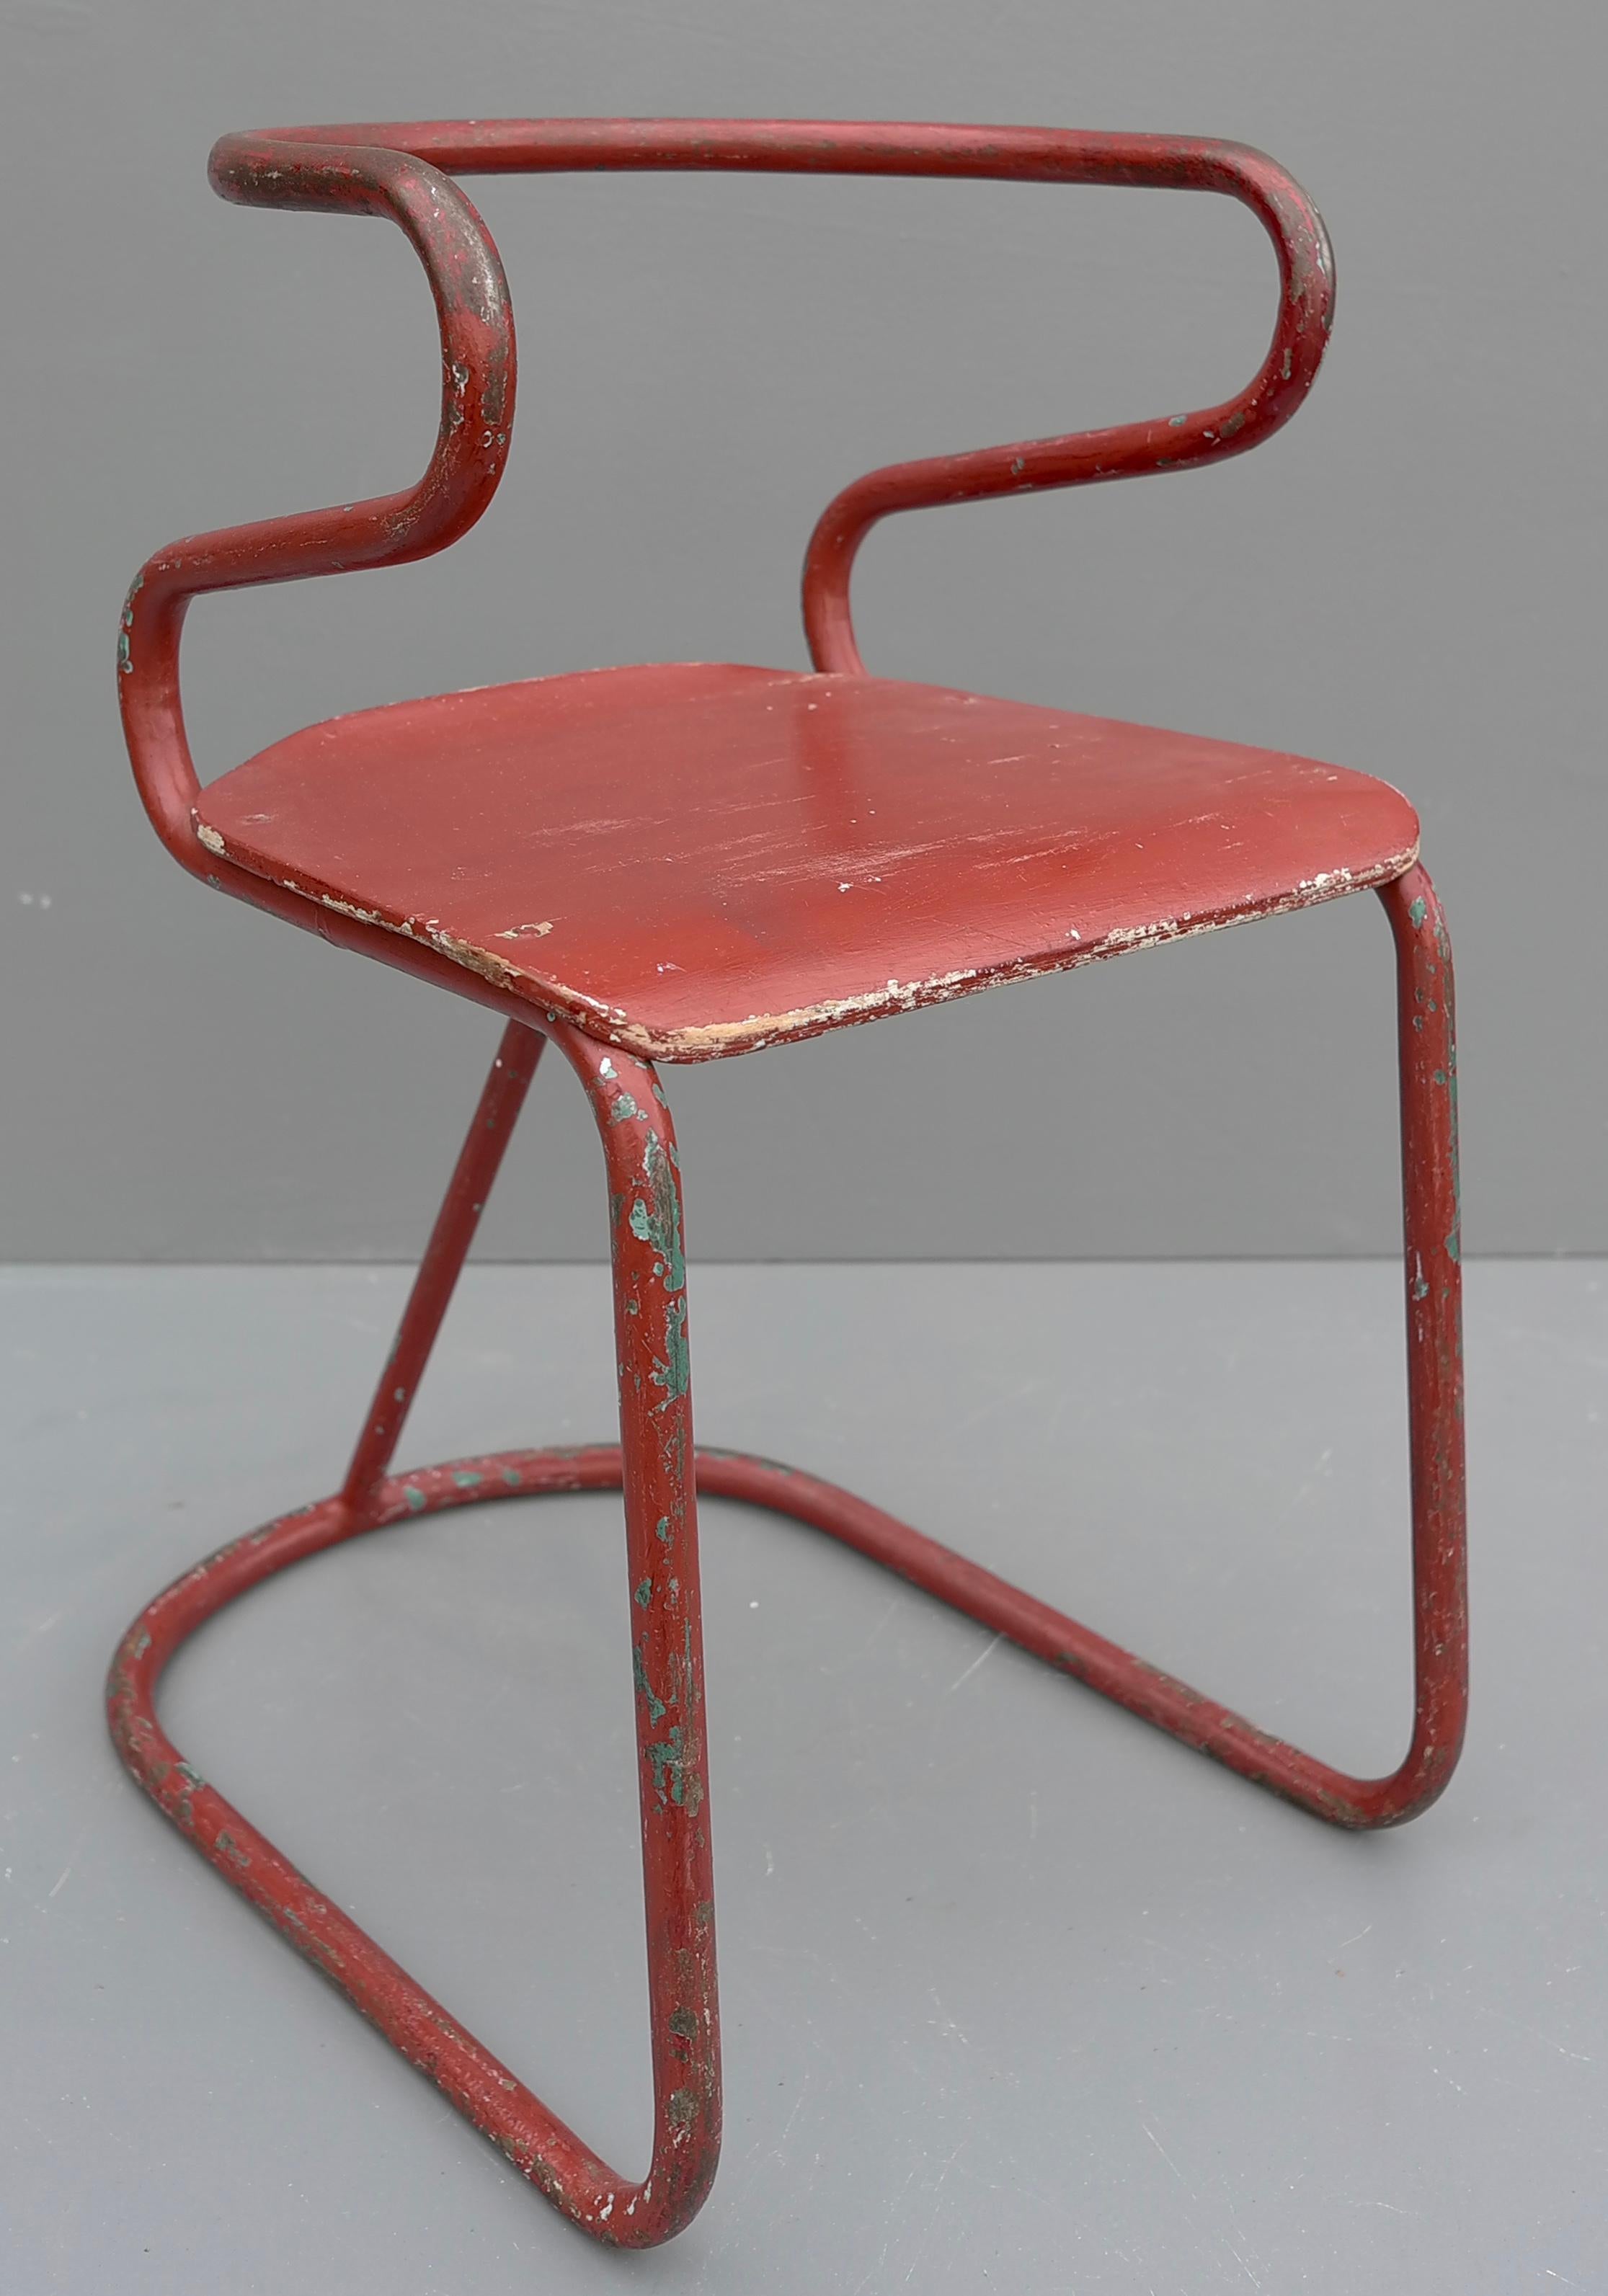 Mid-20th Century Red Sculptural Tubular Steel and Wood Mid-Century Modern Children Chair, 1950's For Sale